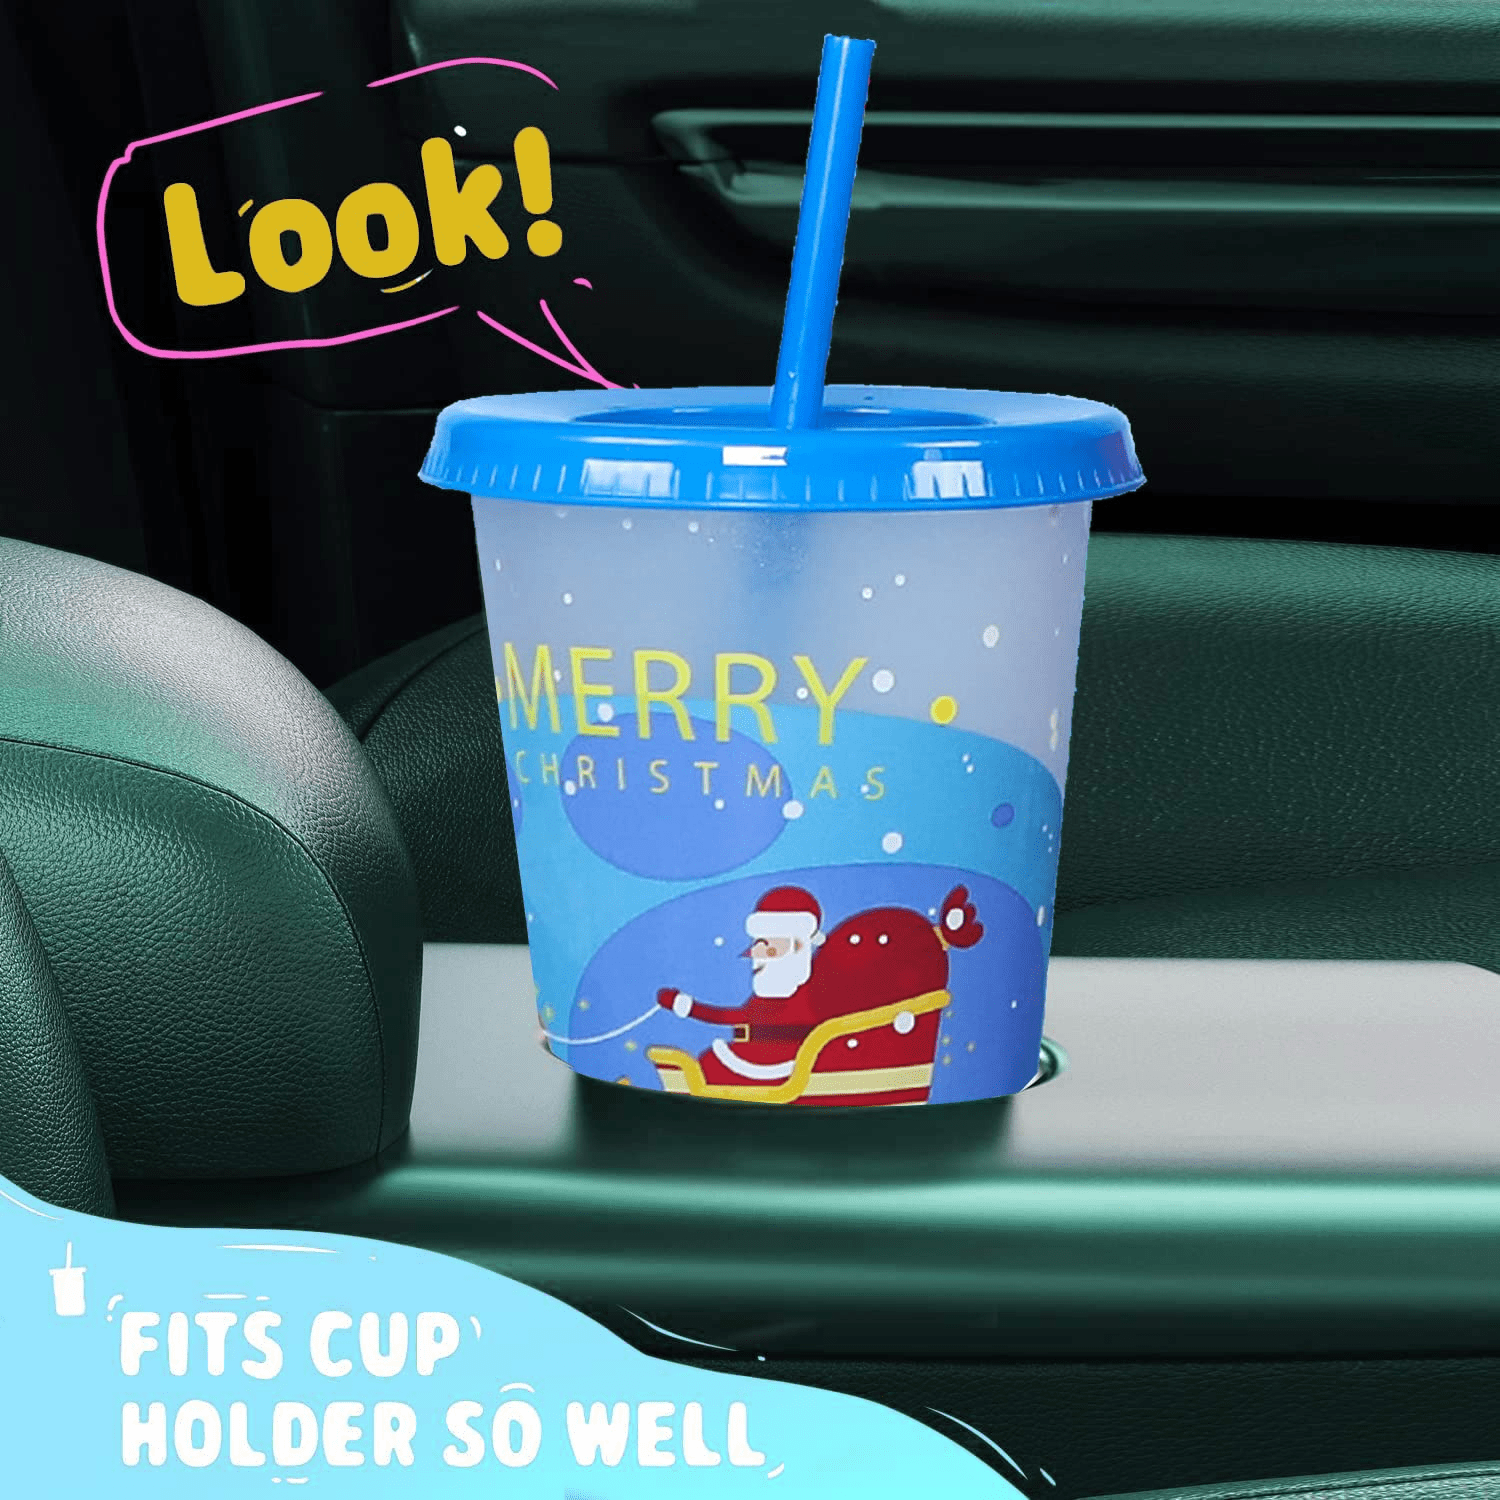 24 Oz. Color Changing Cups with Lids and Straws - FLFS120